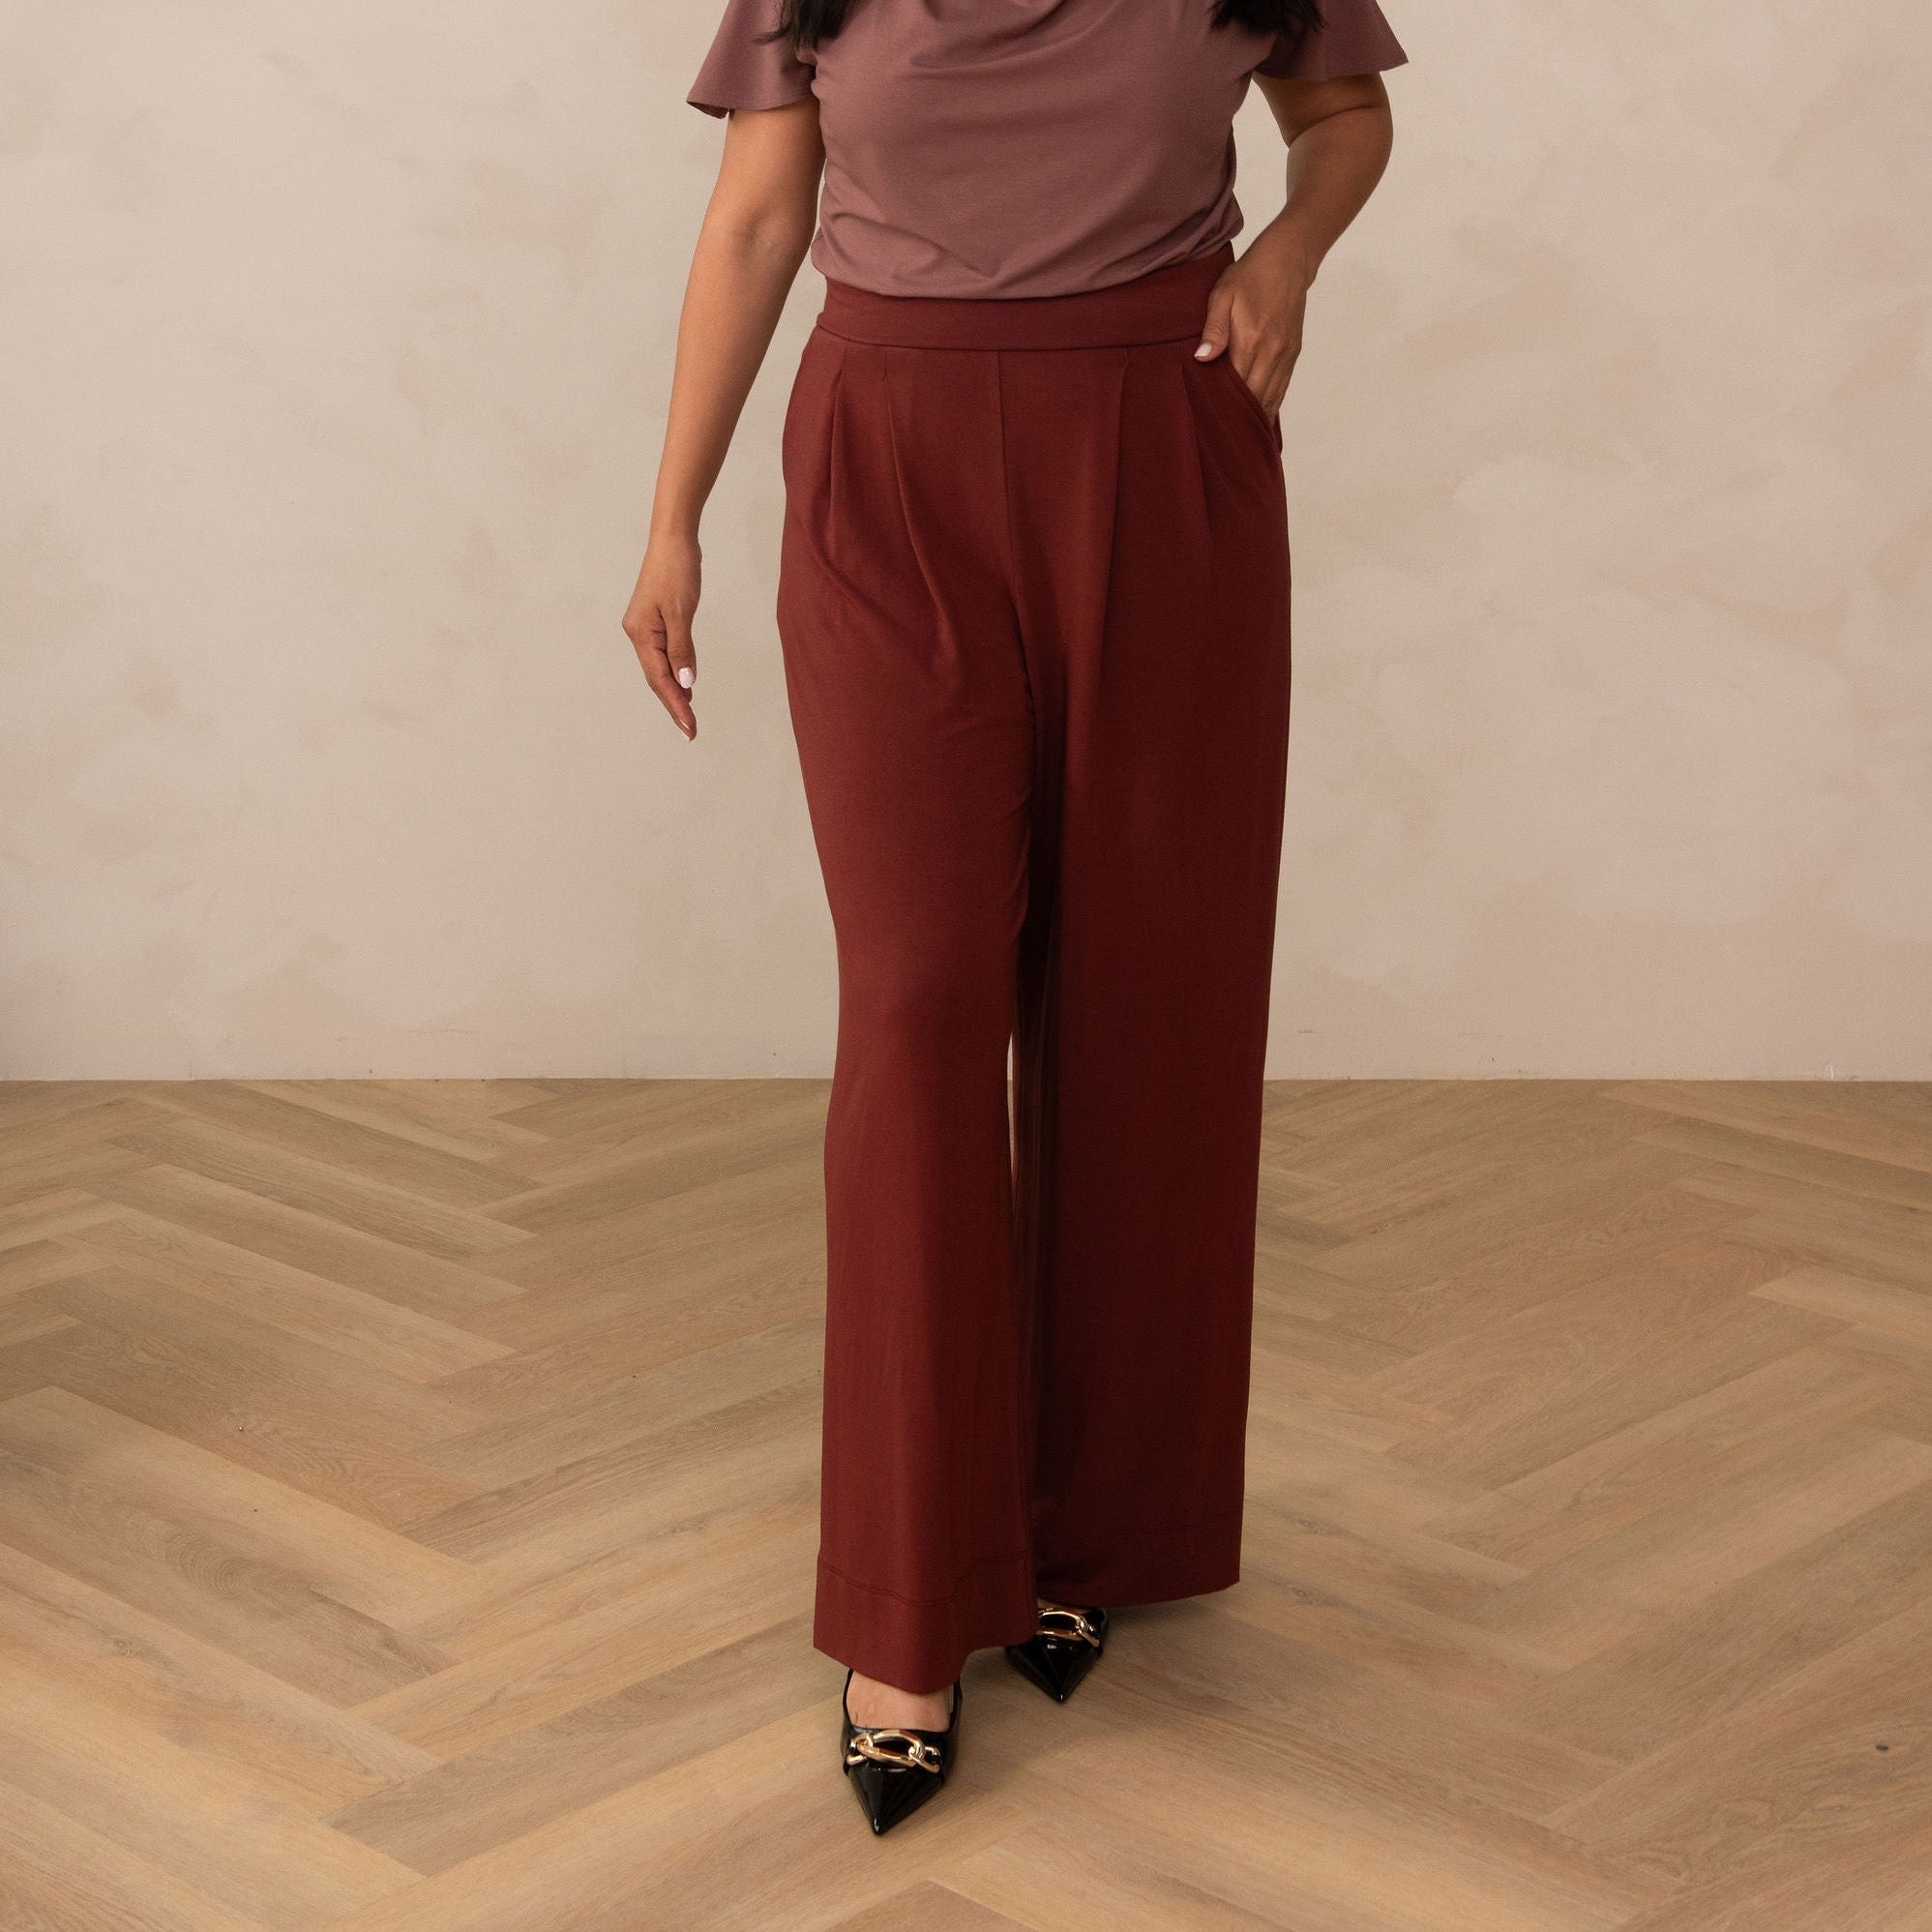 Buy Red Ankle Length Pant Rayon for Best Price, Reviews, Free Shipping